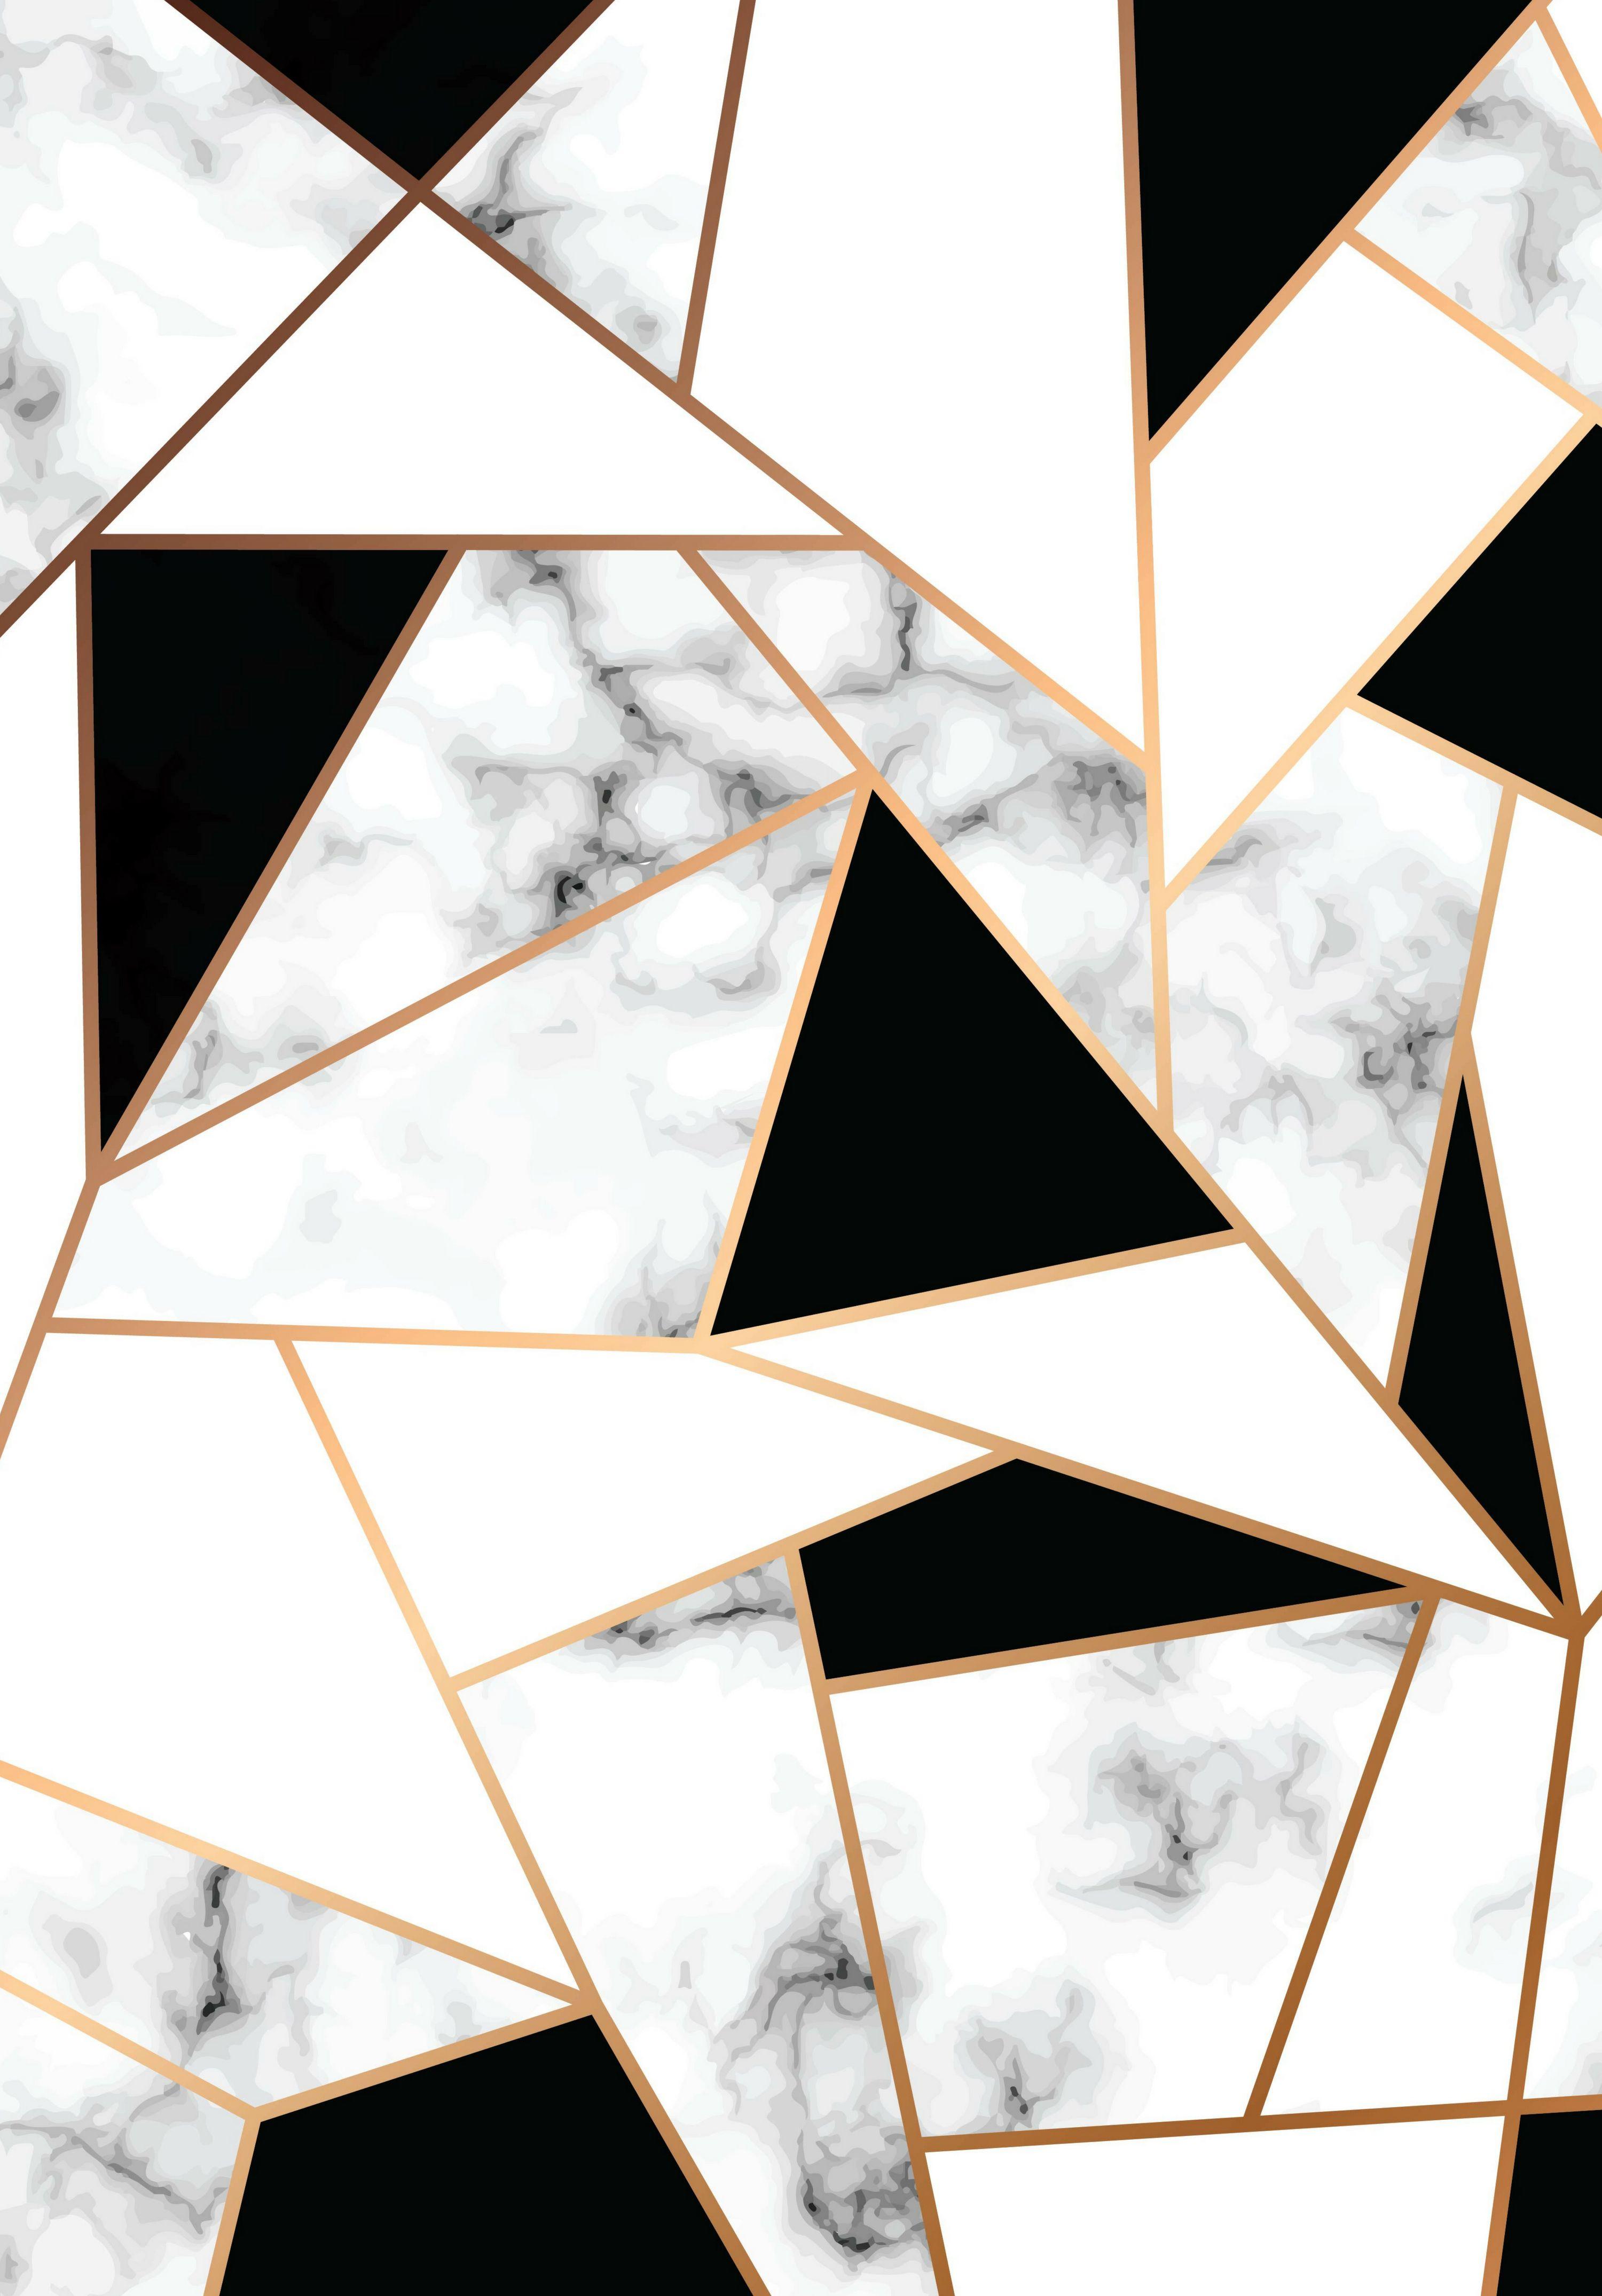 3000 x 4300 · jpeg - Wallpaper abstract geometric marbe; golden and marble; black and whit ...